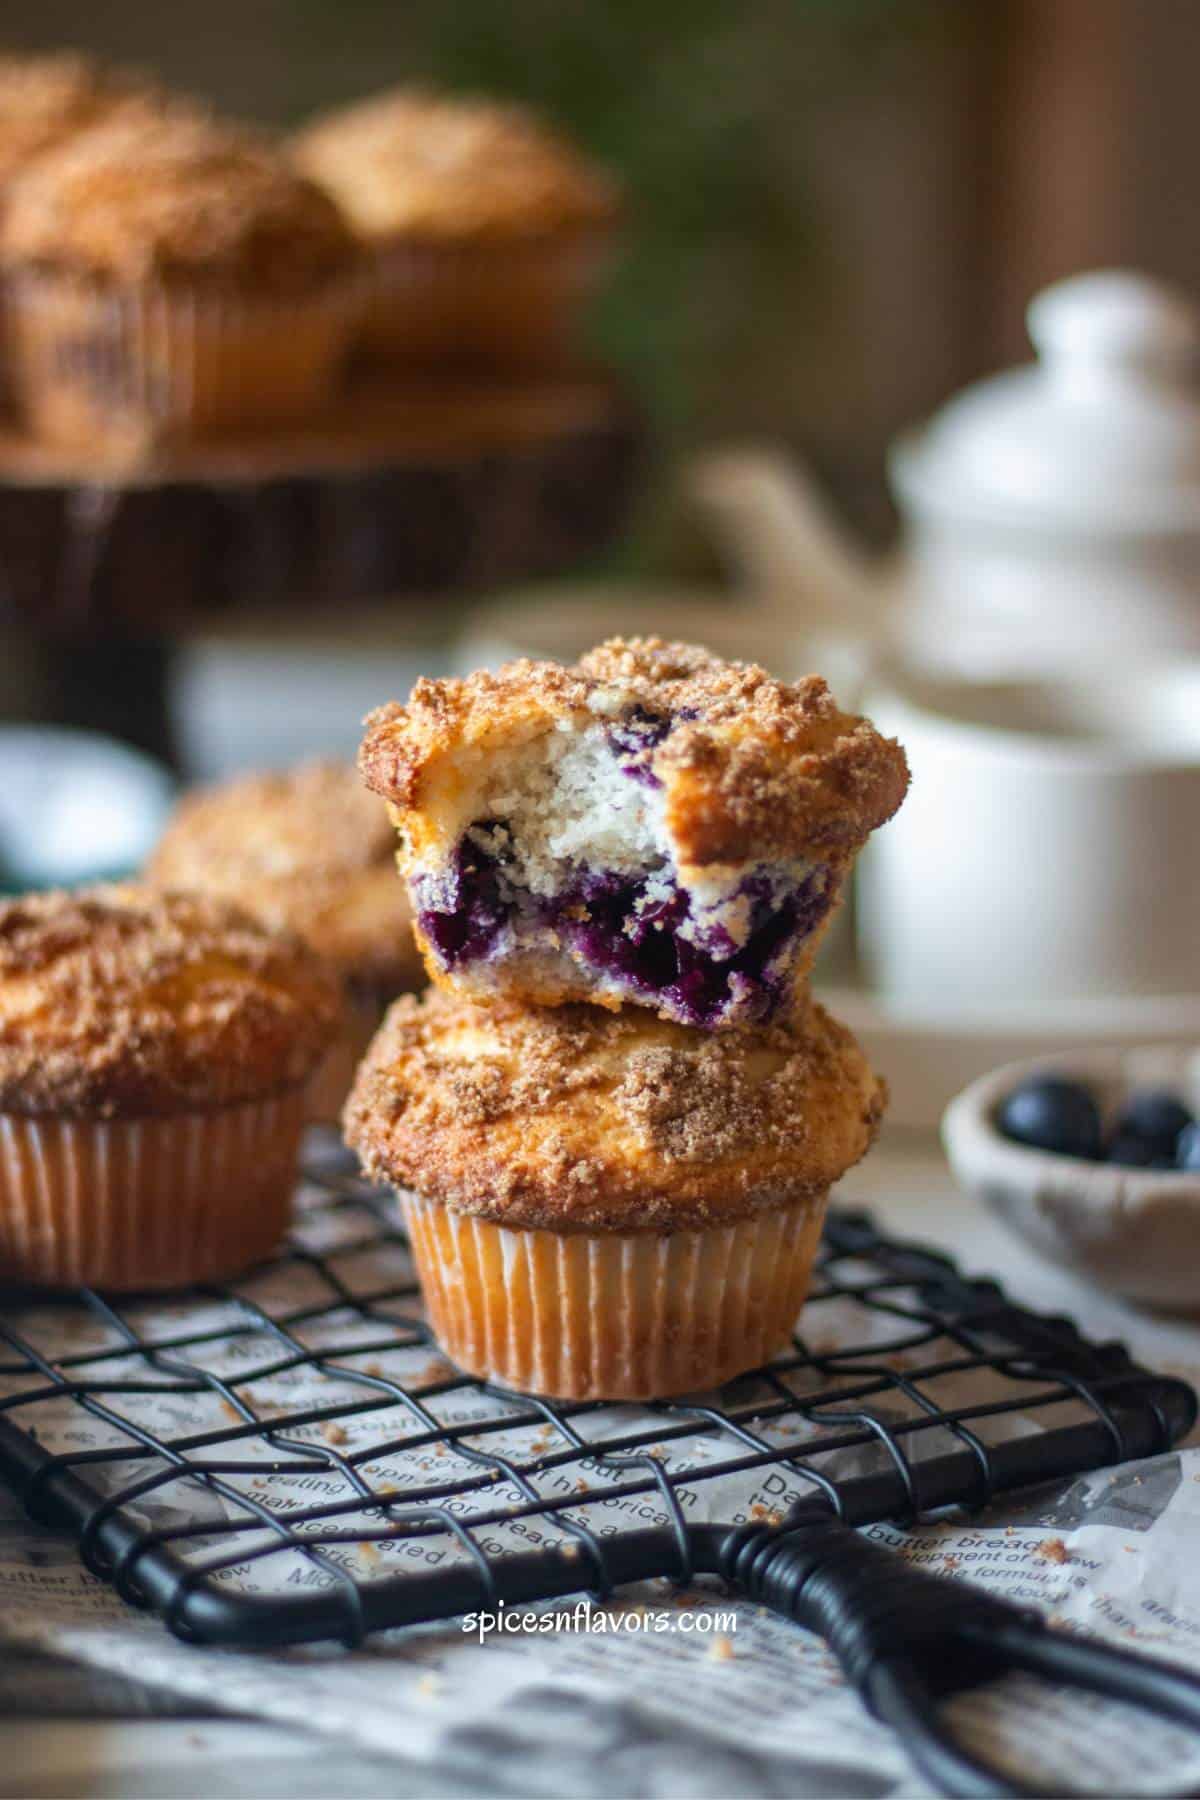 half eaten blueberry muffin placed on another muffin